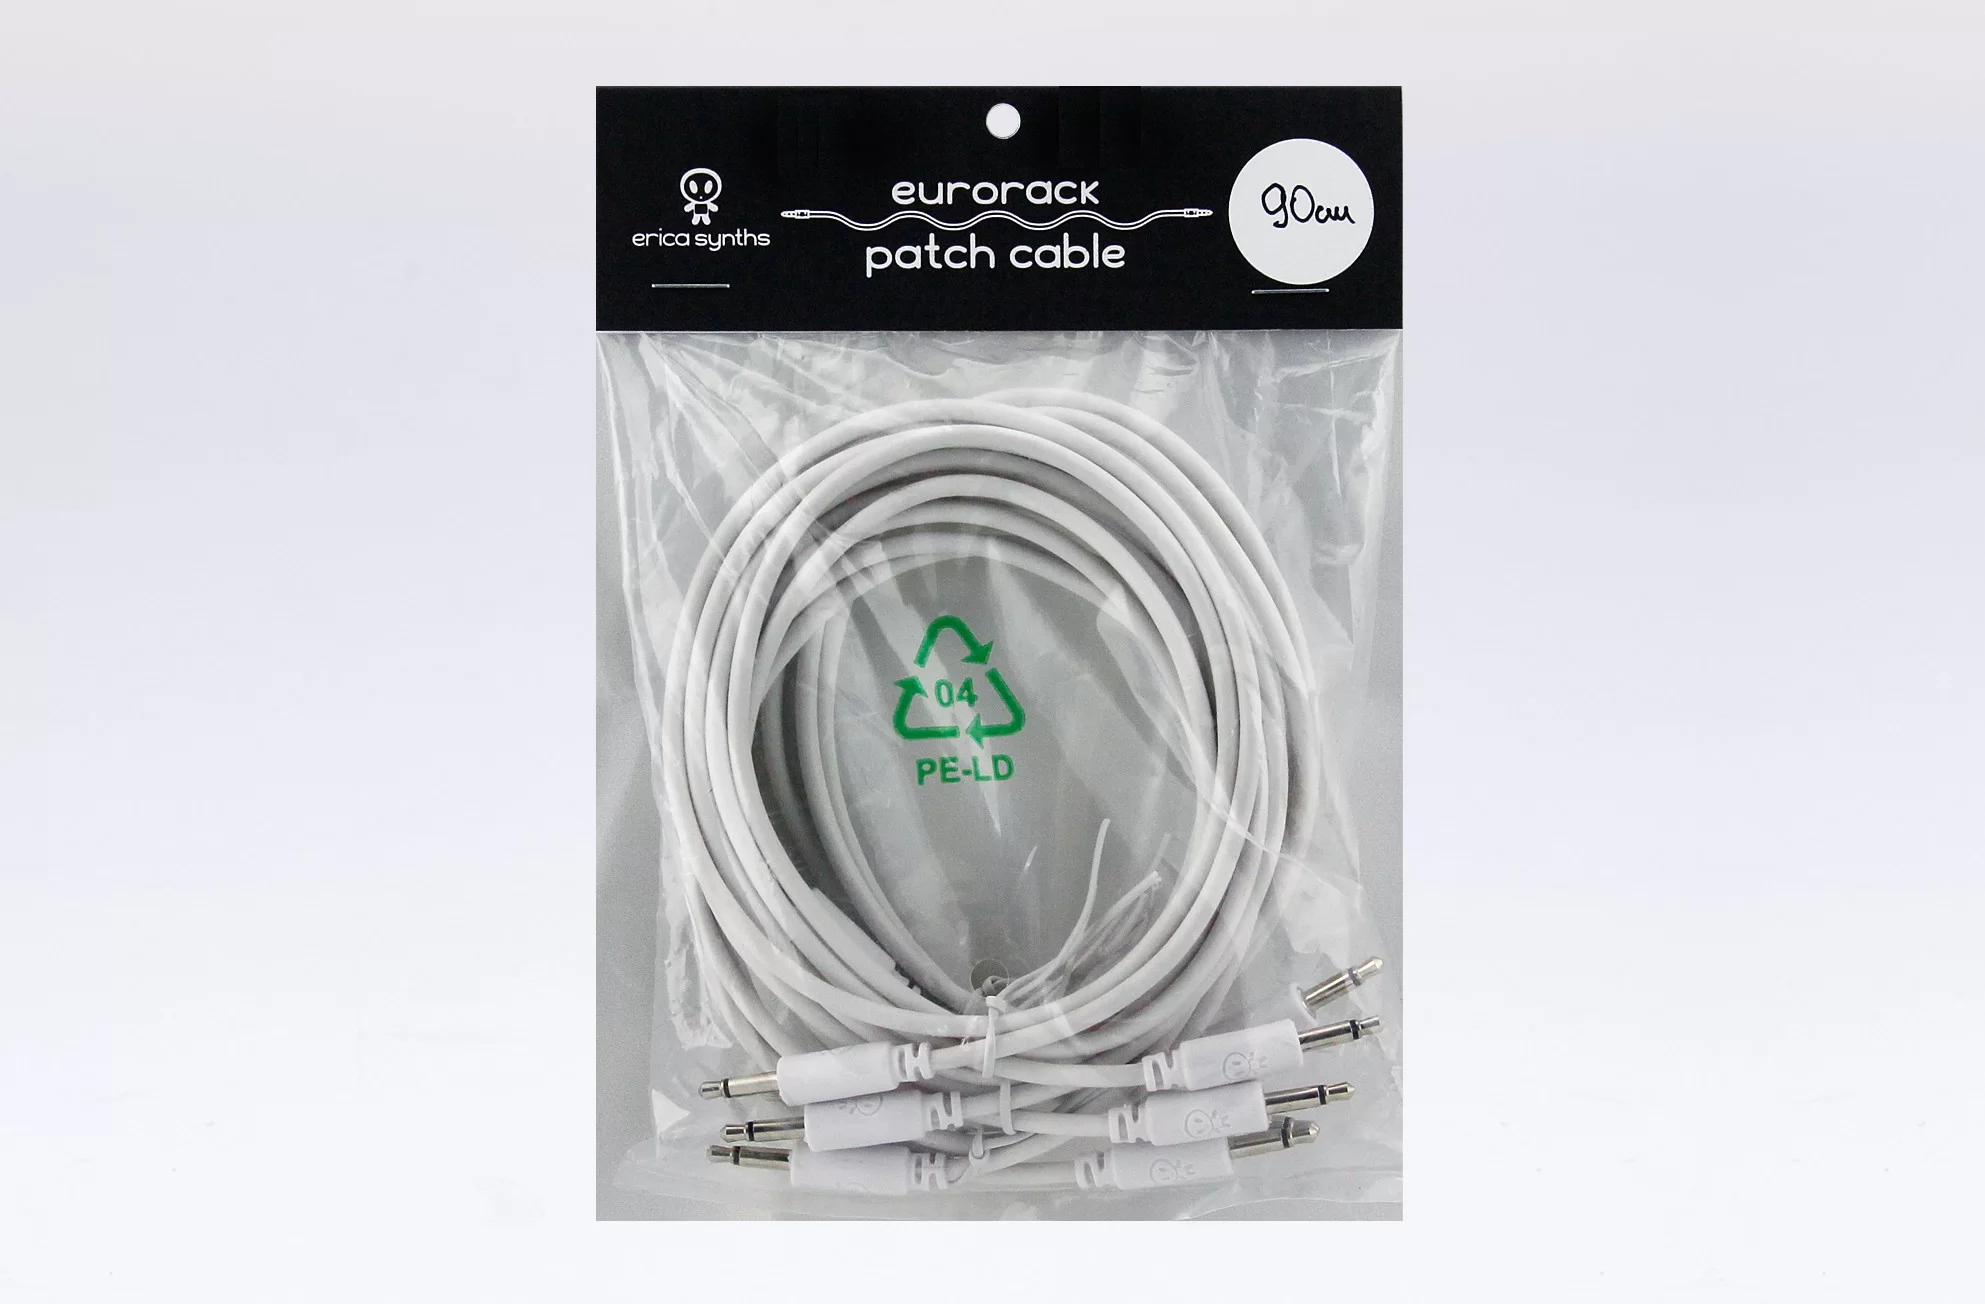 Erica Synths Eurorack patch cables 90cm (5 pcs) - Red